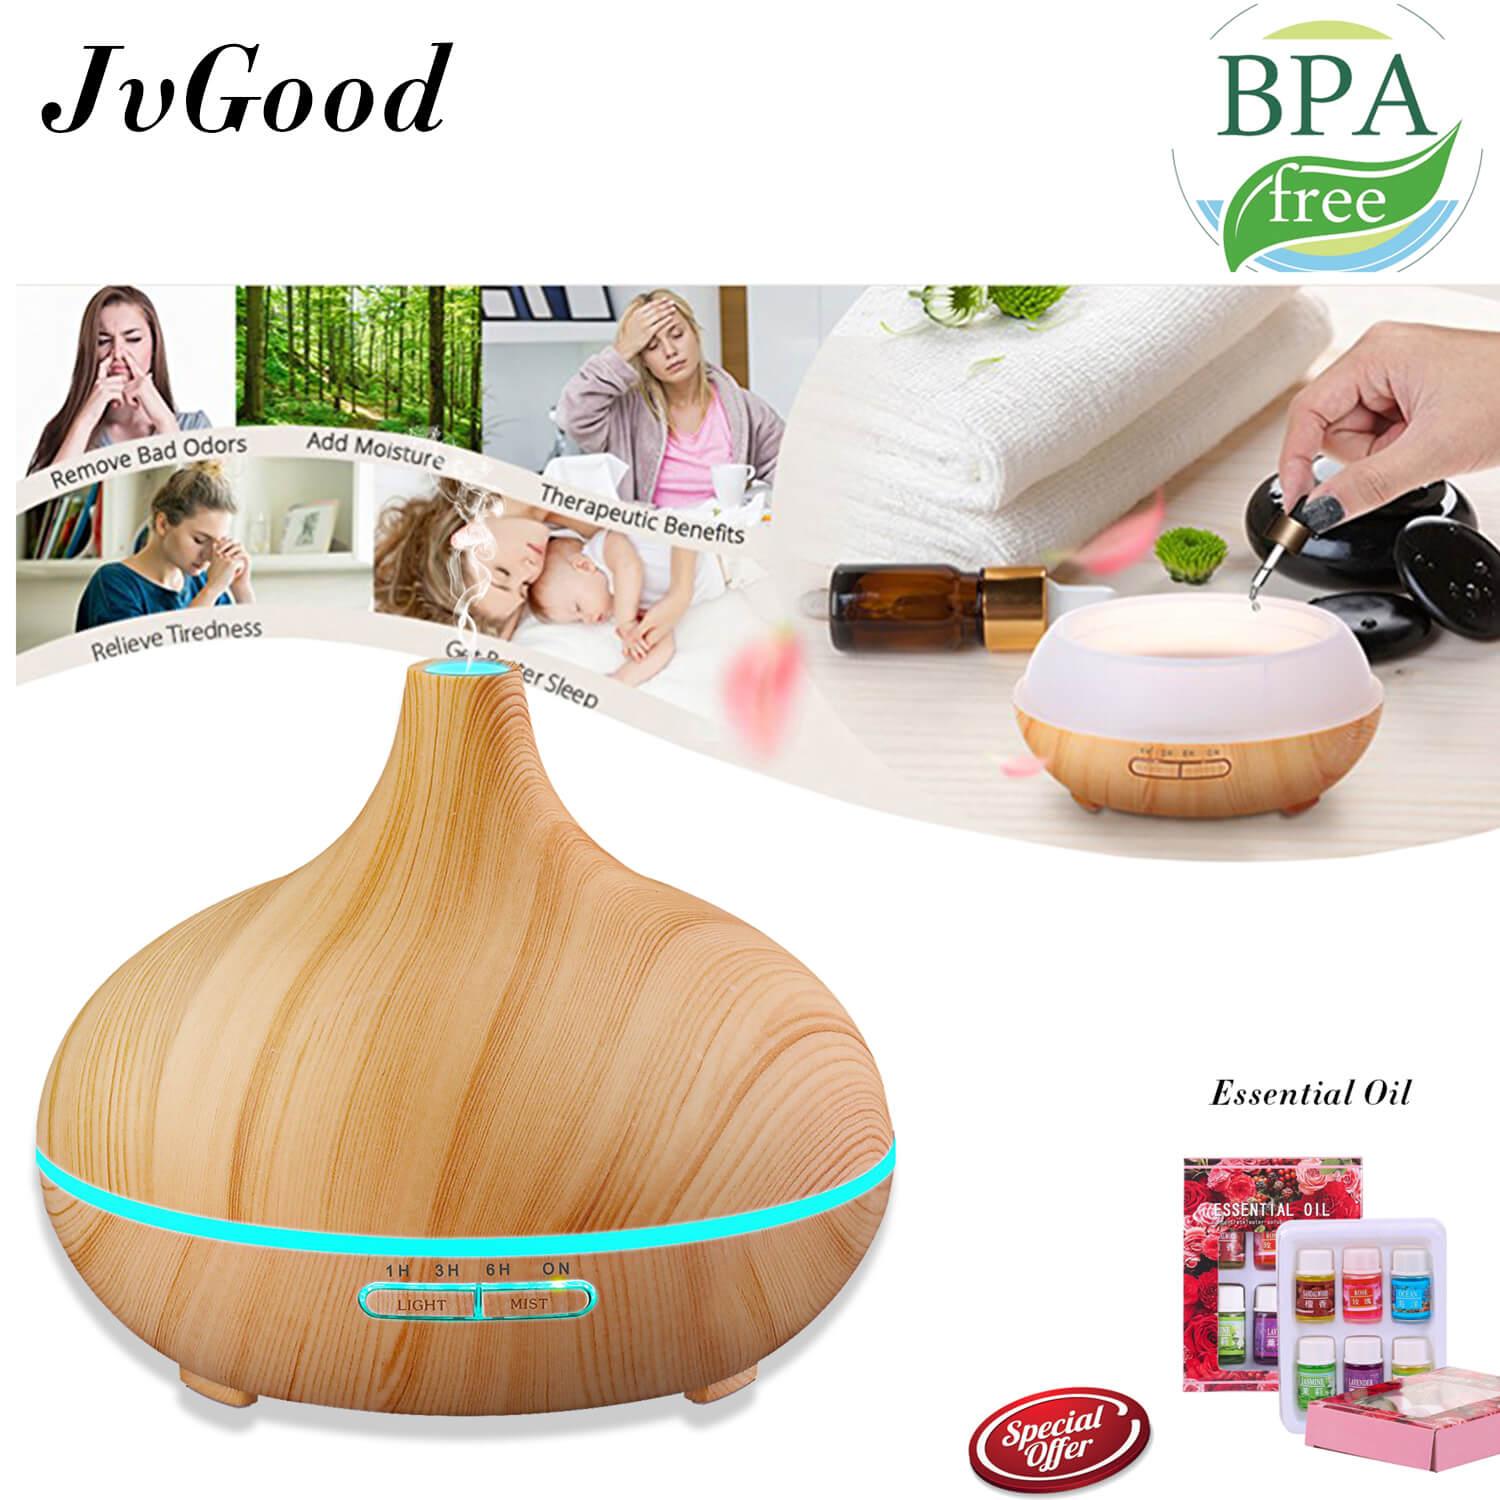 JvGood Air Humidifier Ultrasonic Aroma Diffuser Cool Mist Humidifier Essential Oil Diffuser Aromatherapy Diffuser Wooden Air Purifier Color Changing Air Treatment Mist Maker